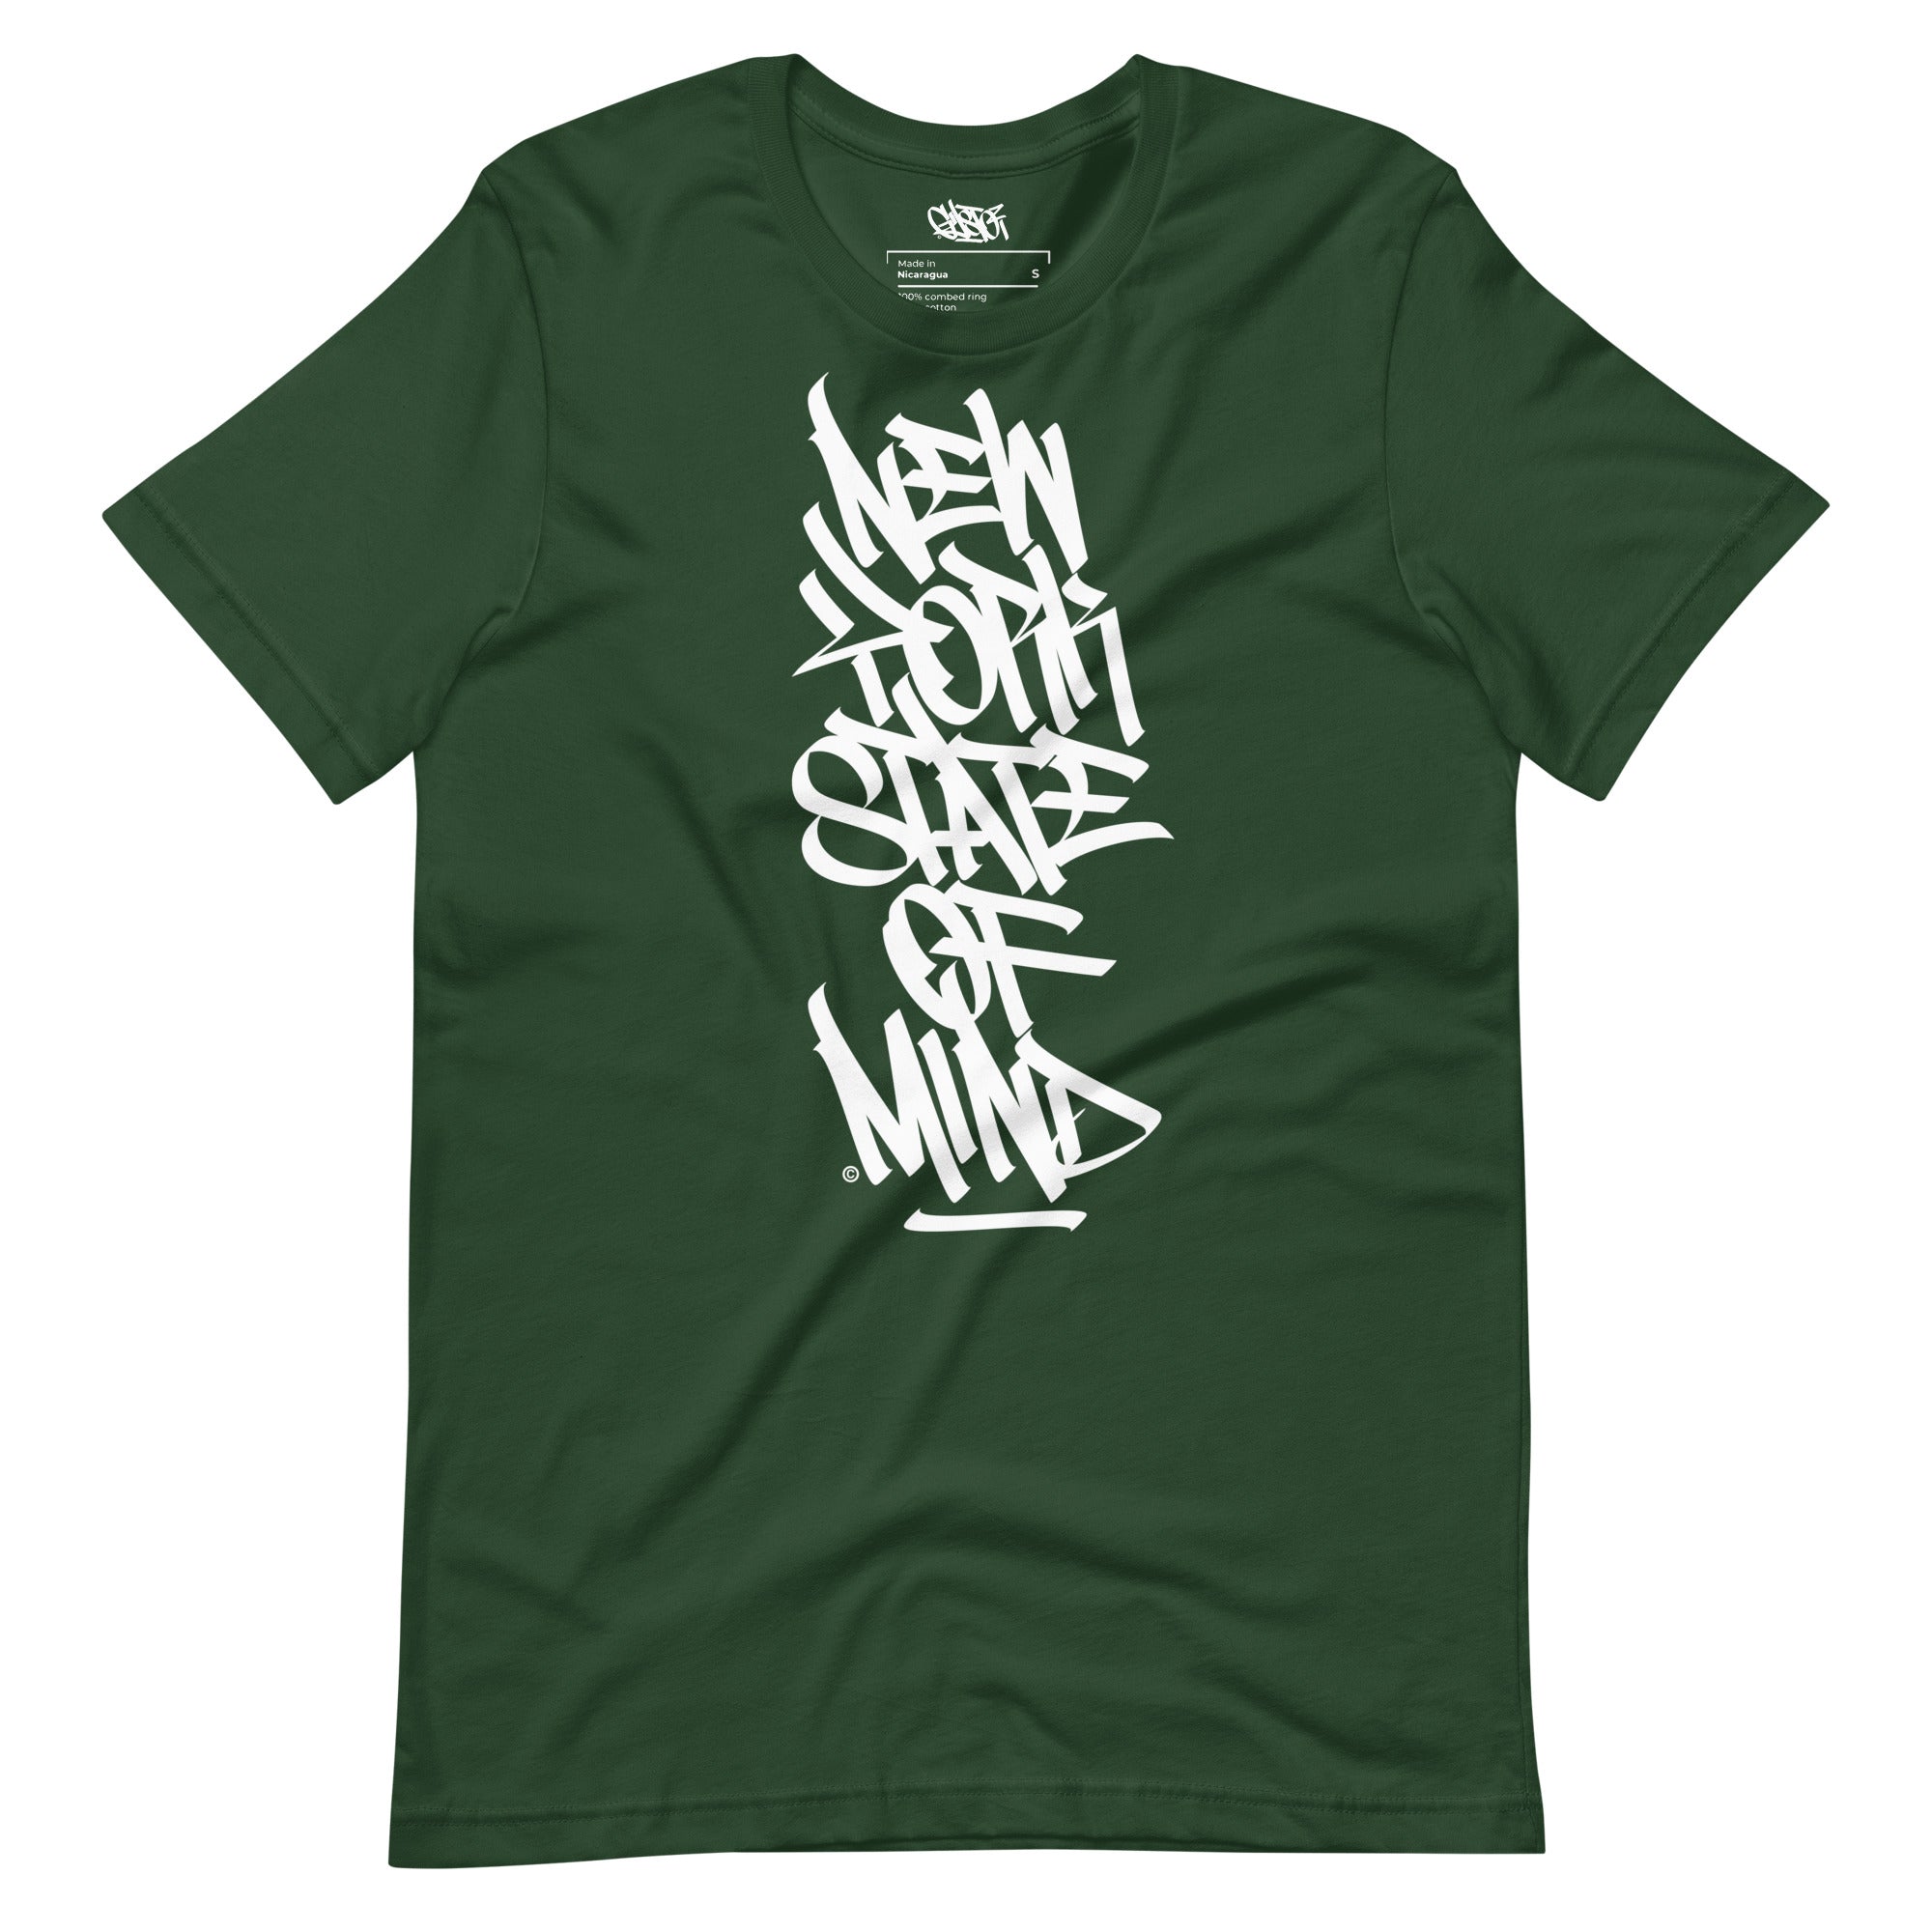 New York State of Mind - Unisex T-Shirt